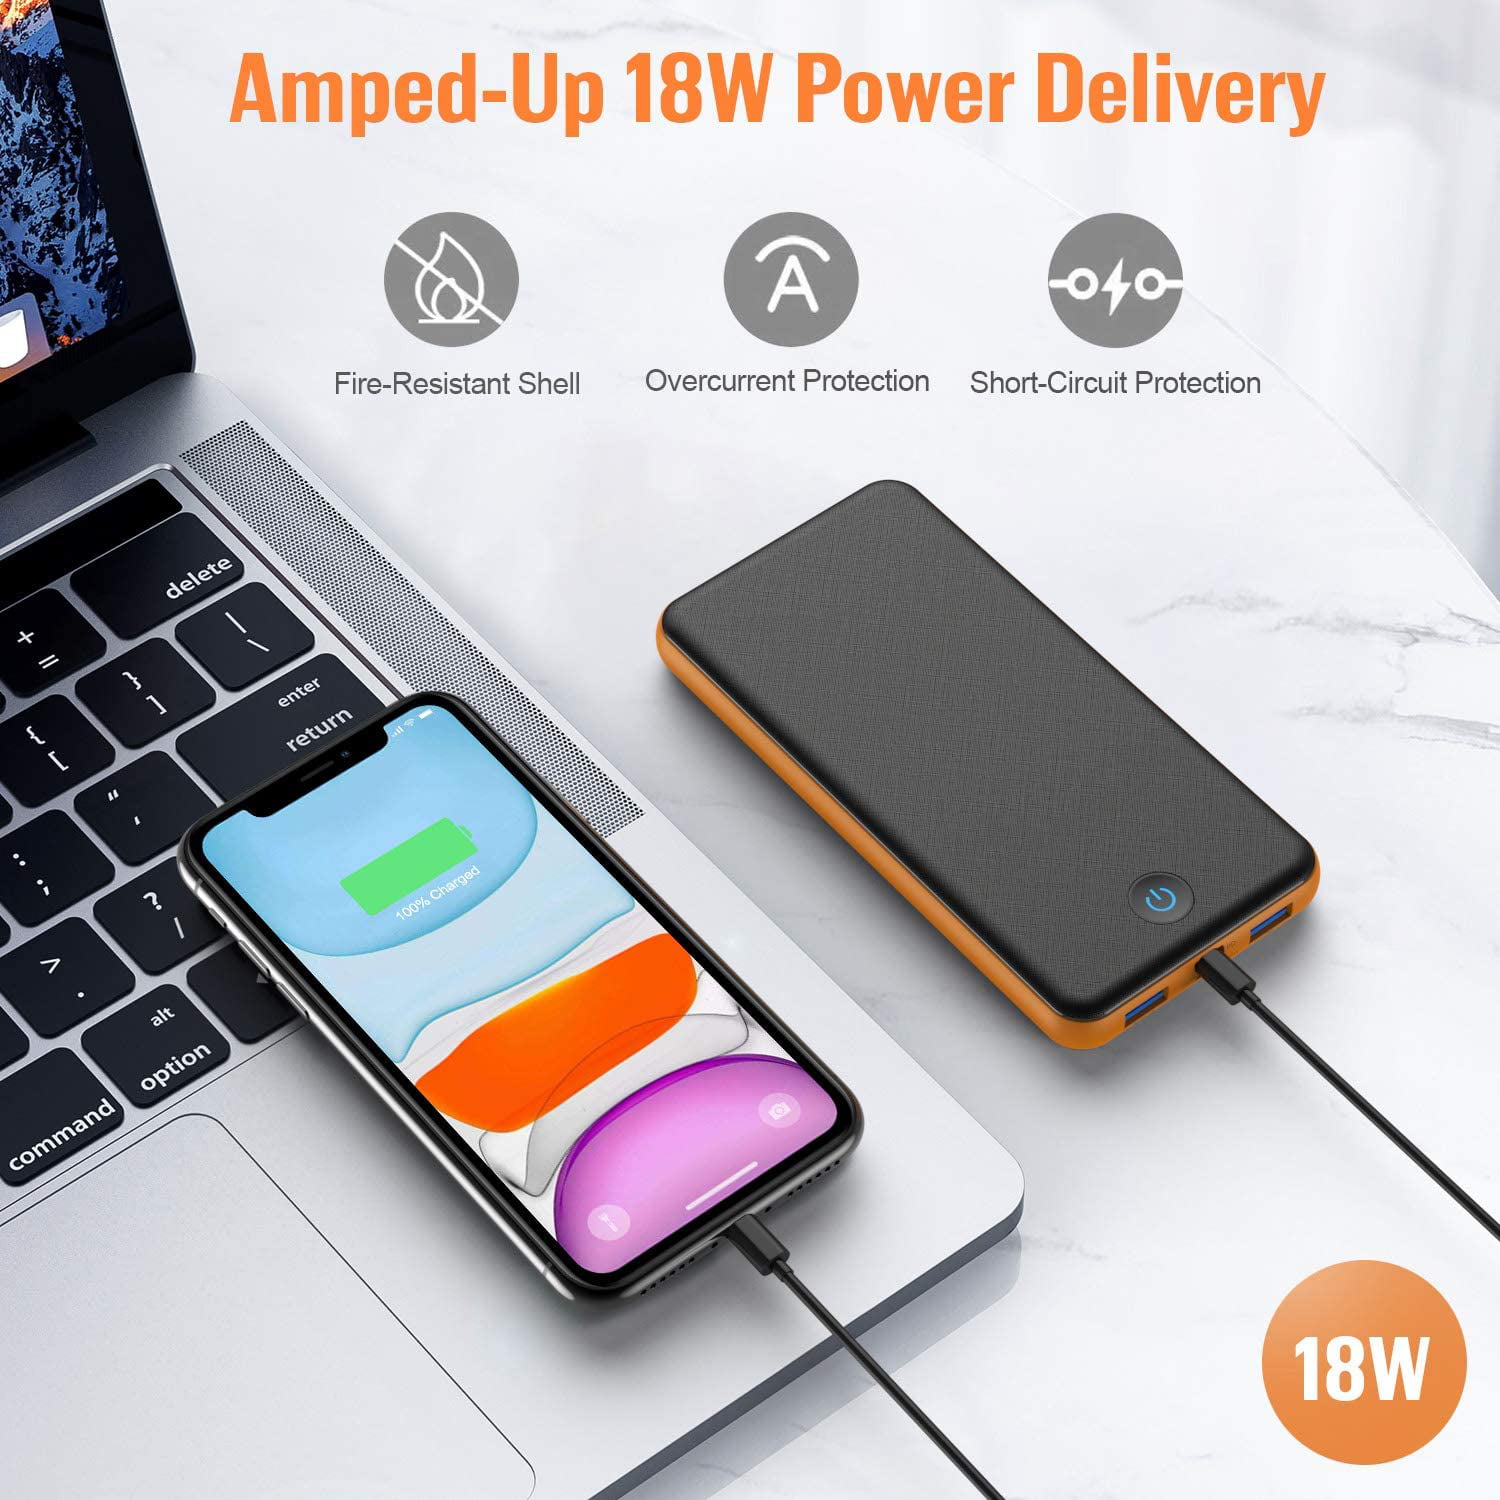 2 Inputs and 3 Outputs Cell Phone Charger for iPhone,Samsung,Android Phone Power Bank 26800mAh Portable Charger Huge Capacity External Battery Pack with Colorful LED Indicator 18W PD & QC 3.0 Quick Charging Type-C Input/Output Tablet & etc